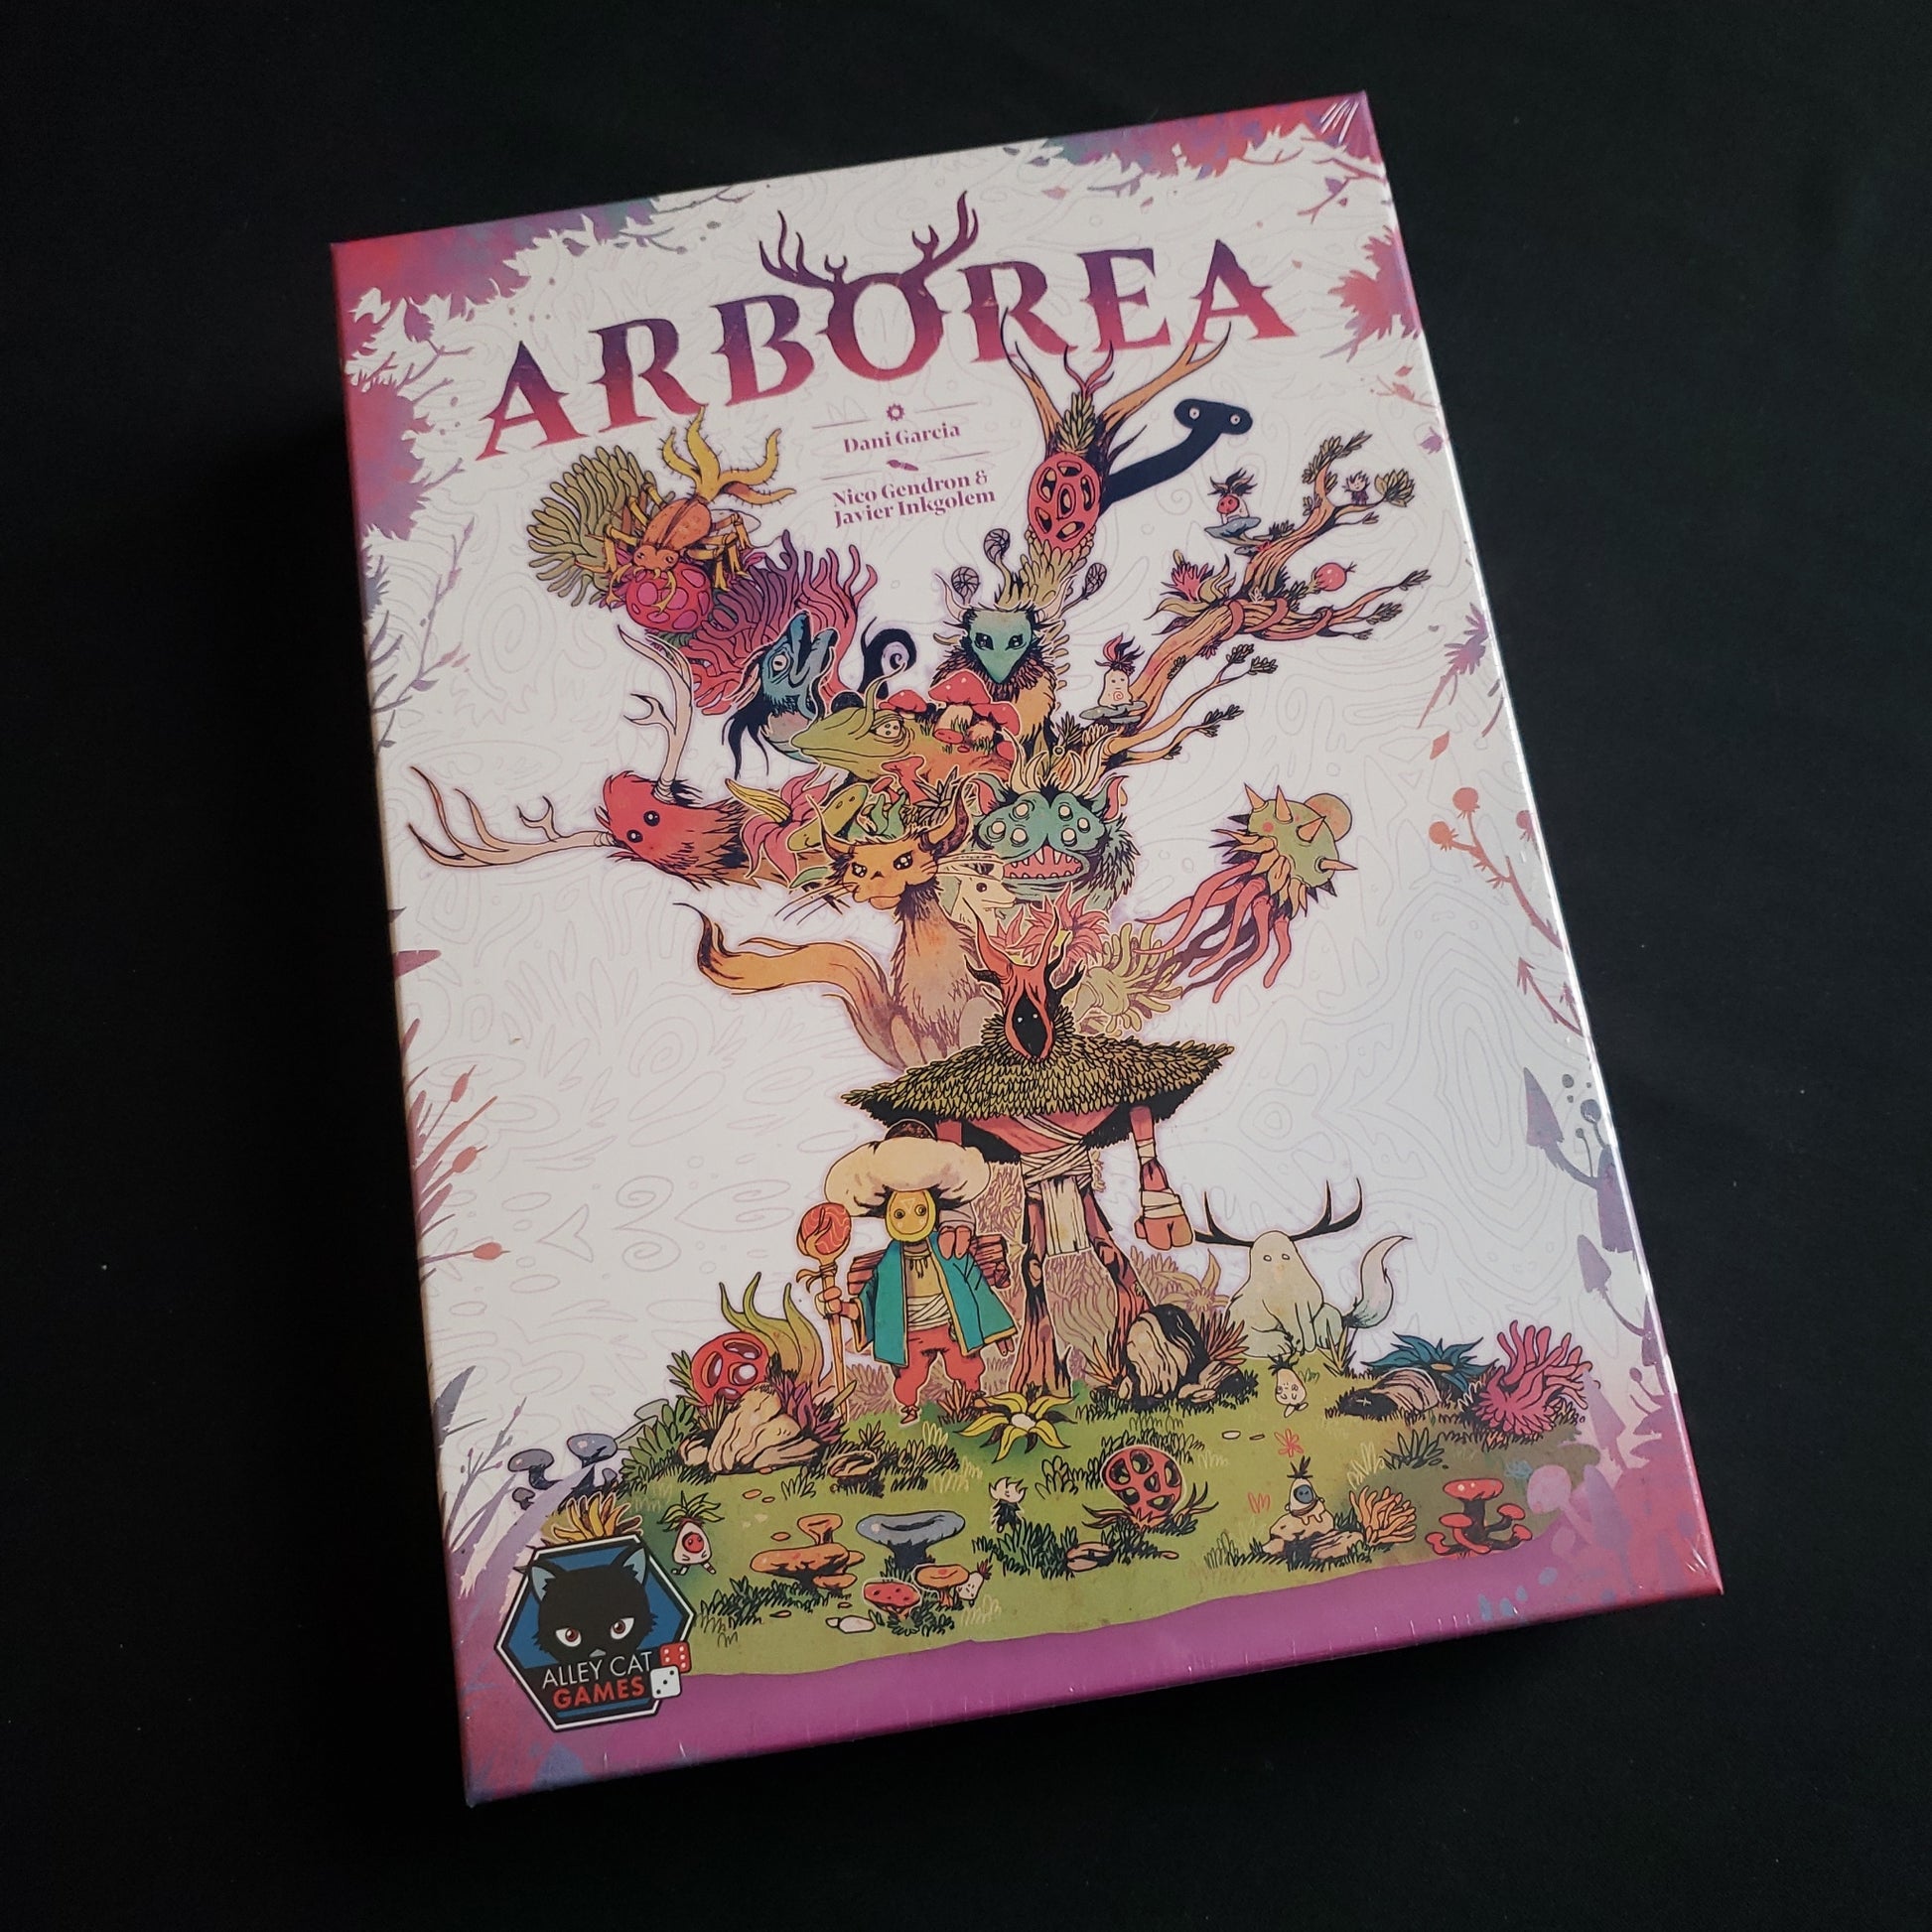 Image shows the front cover of the box of the Arborea board game